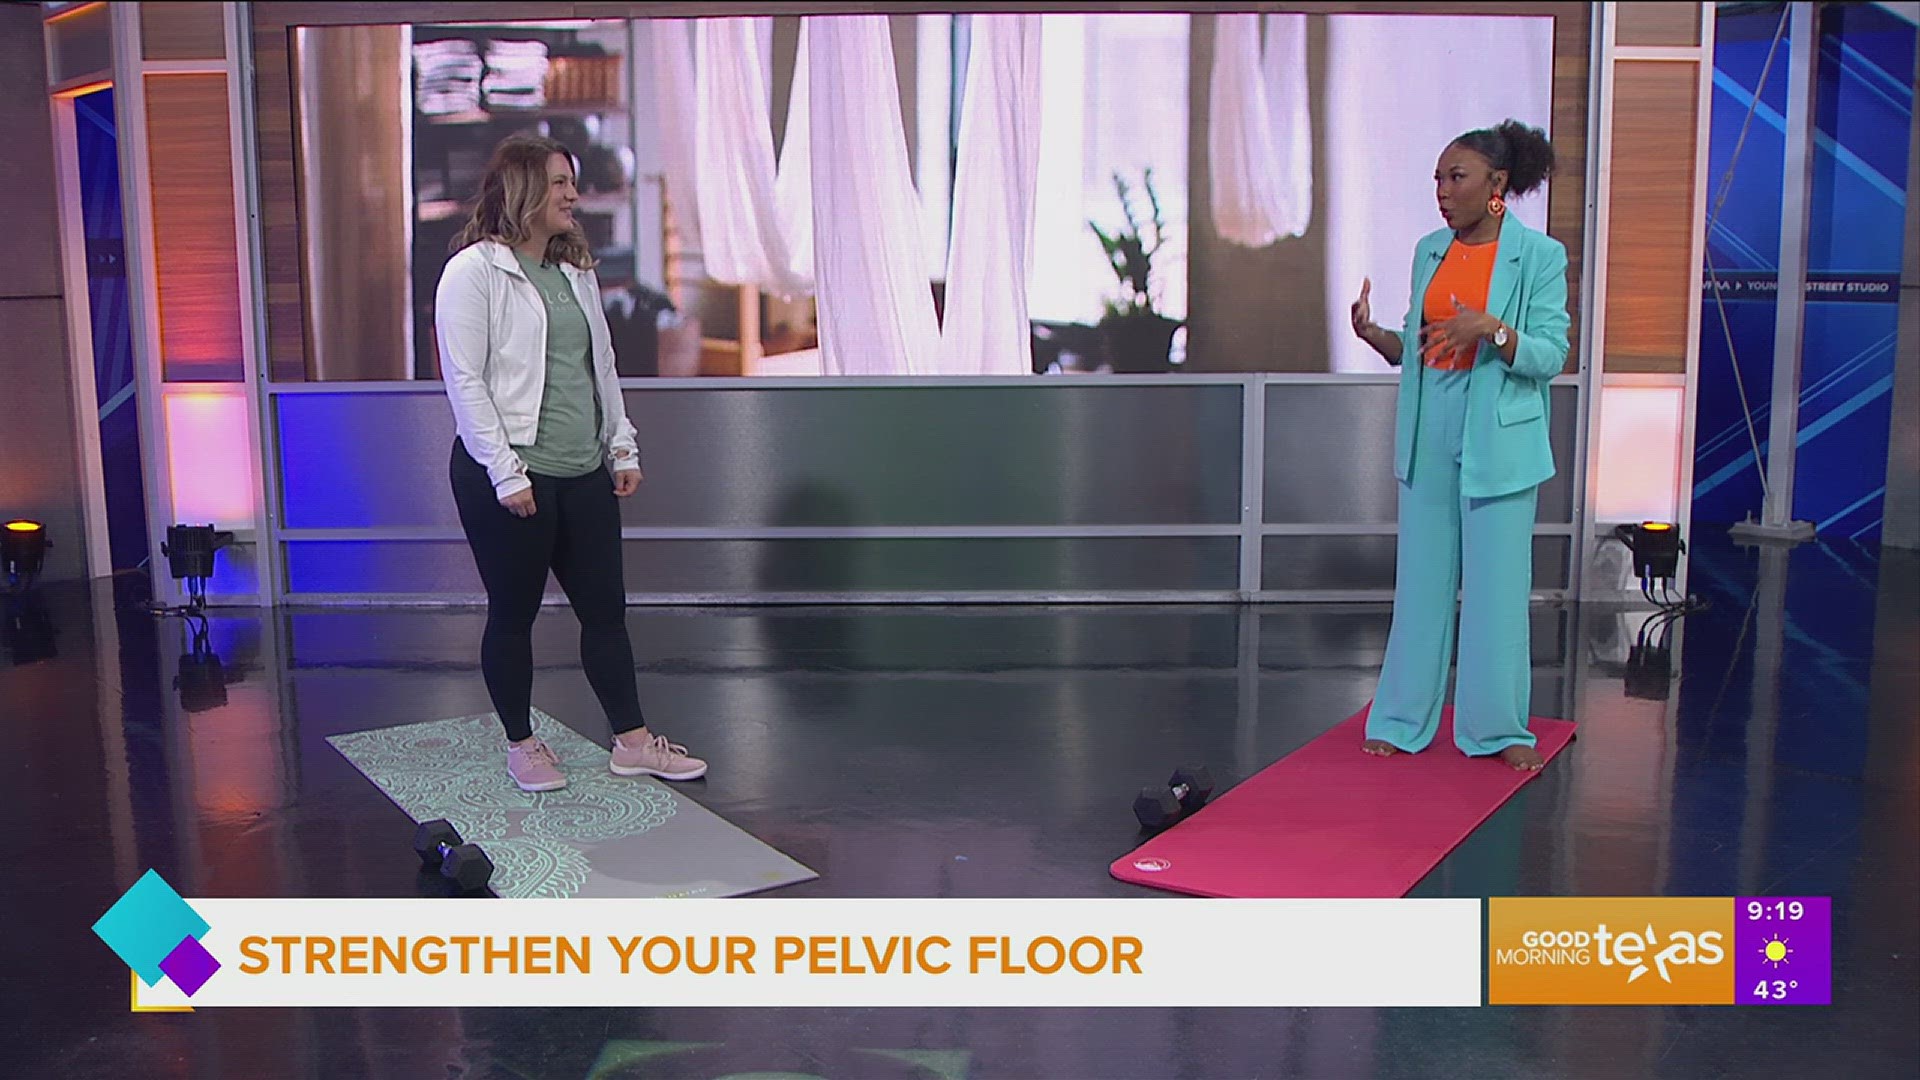 Dr. Logan Spacek shows us what exercises women can do to strengthen their pelvic floor. Go to reclaimwellnesspt.com for more information.